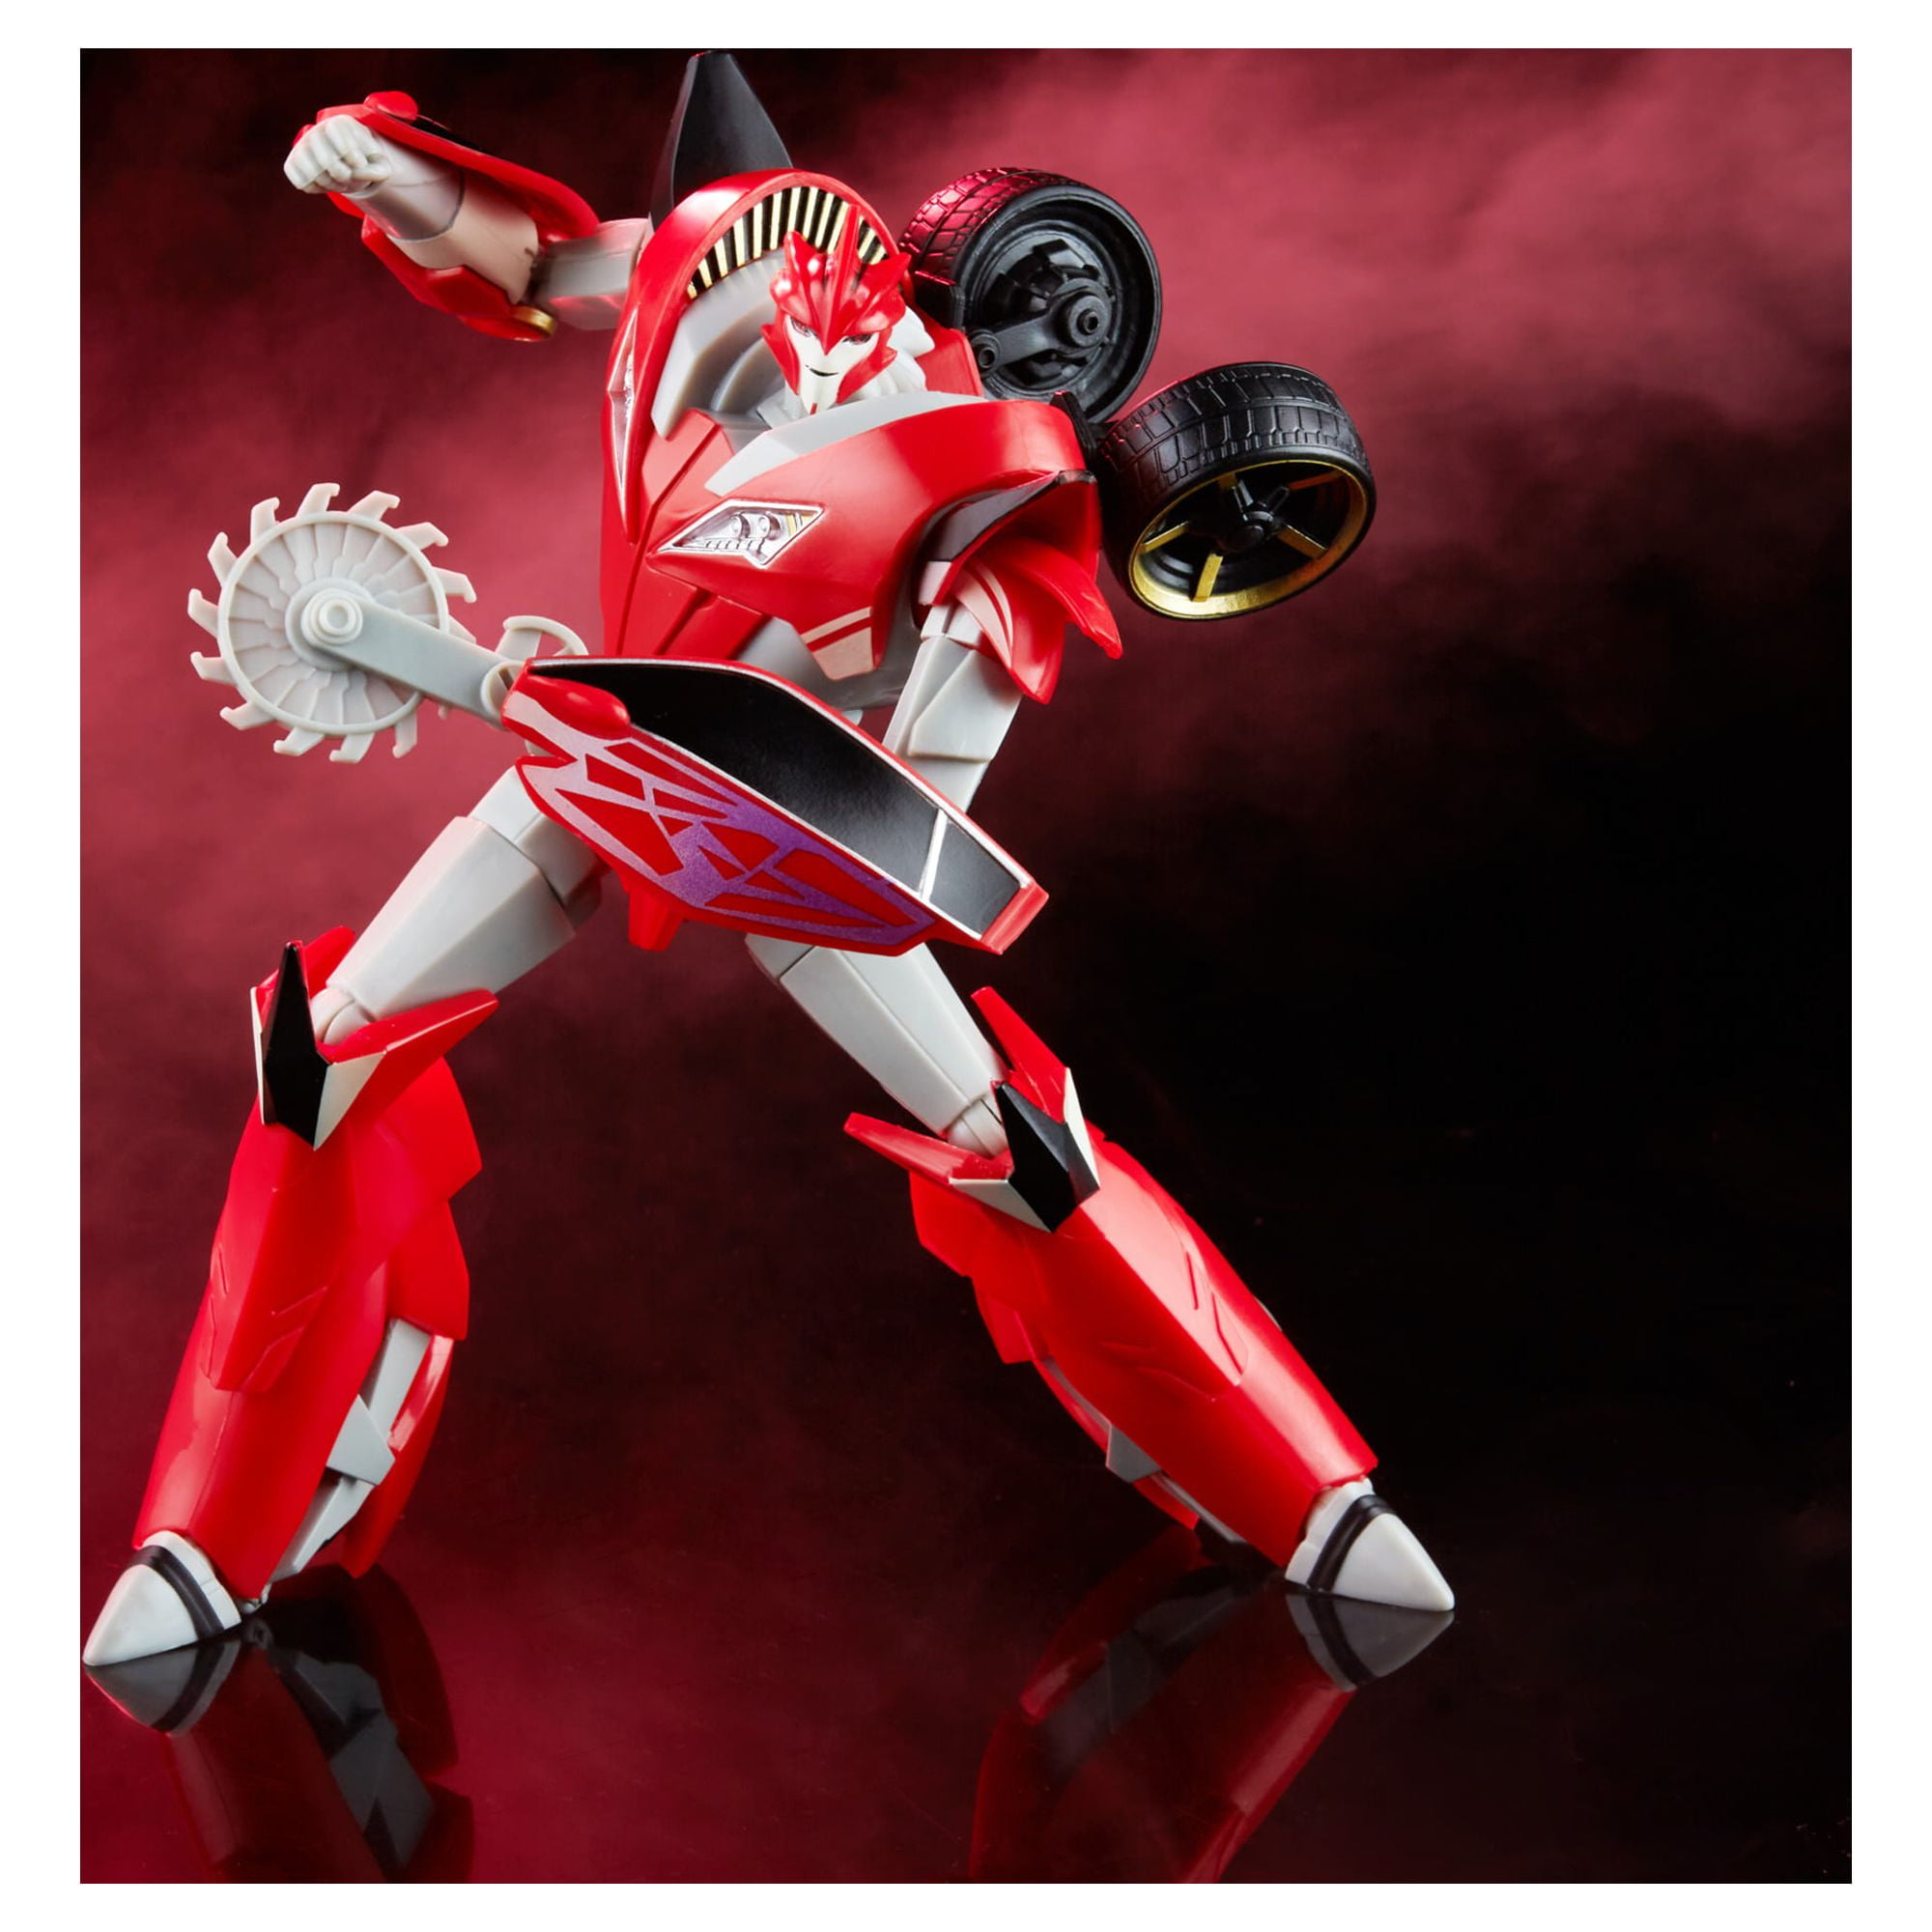 TAKARA TOMY Transformers RED Super Movable 6 Inches Prime Knock